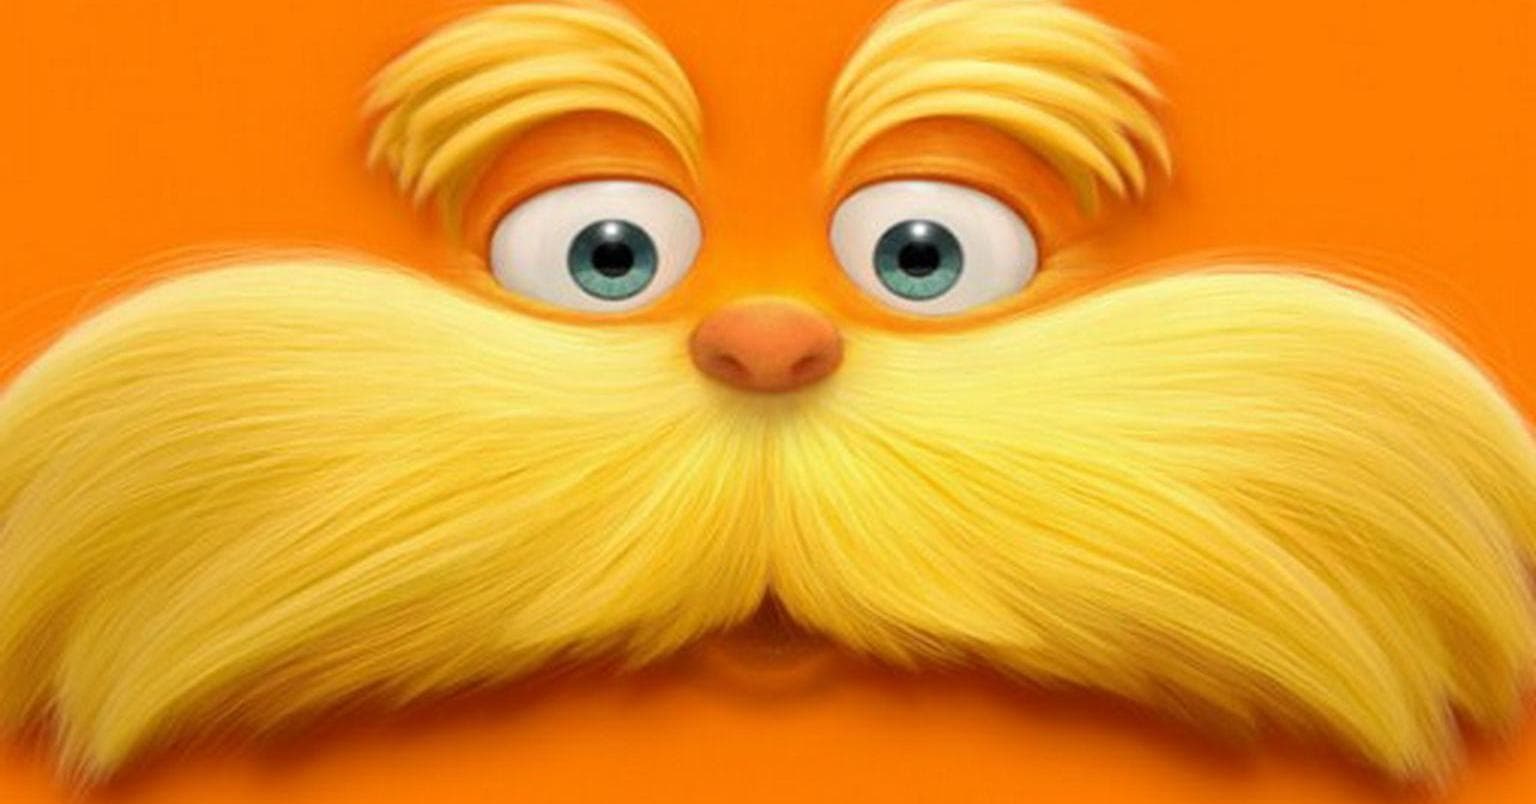 the lorax quotes